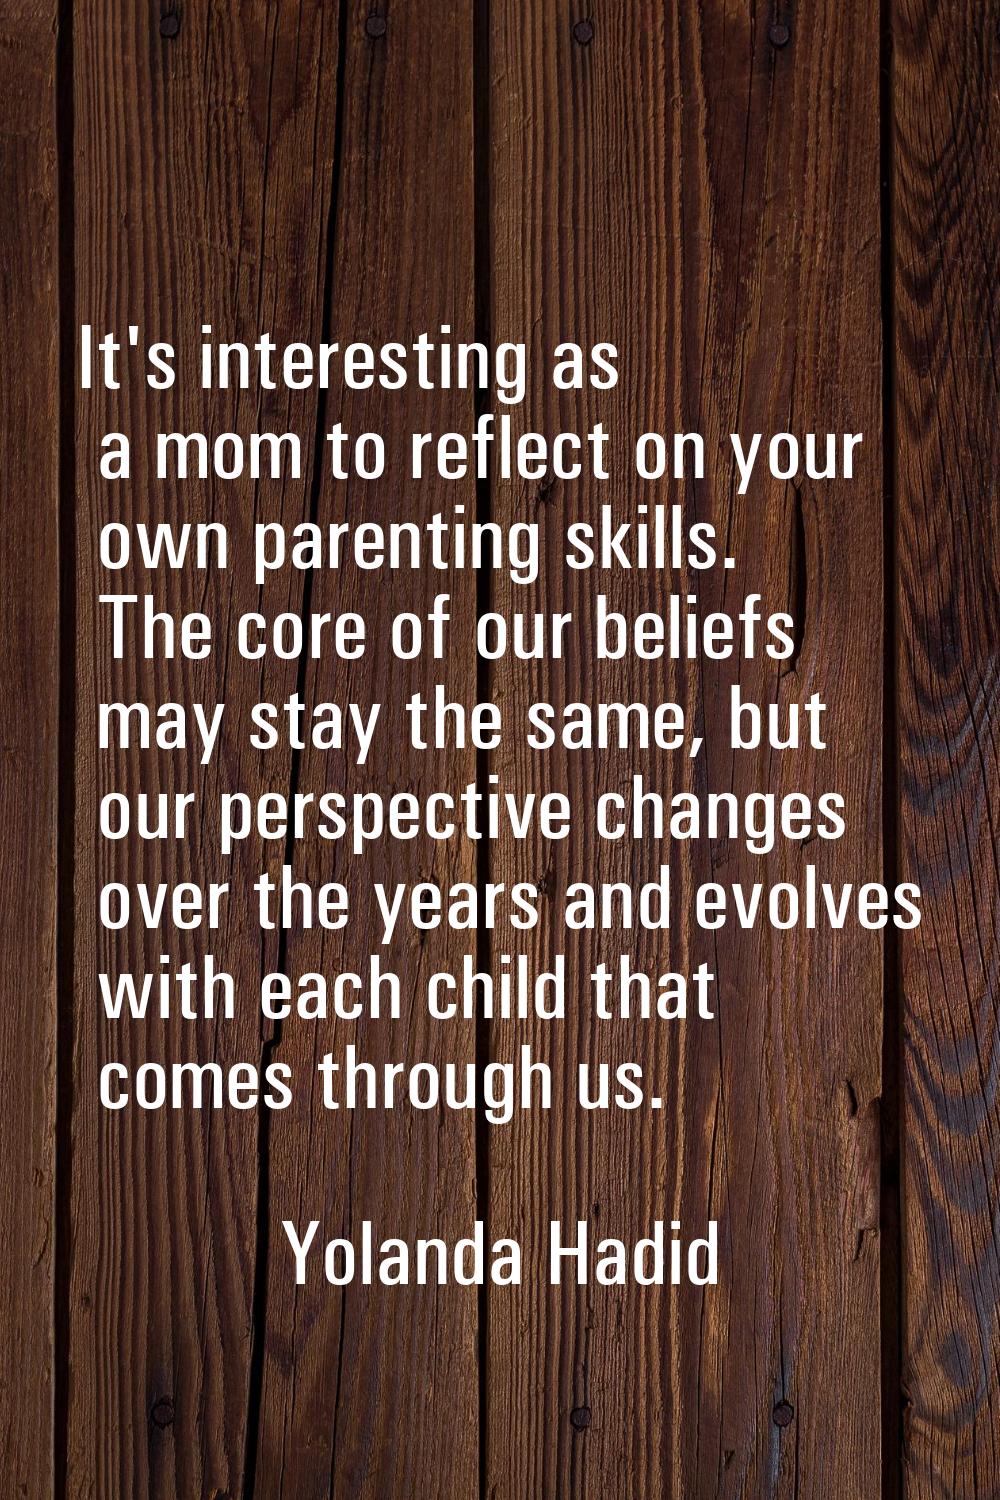 It's interesting as a mom to reflect on your own parenting skills. The core of our beliefs may stay